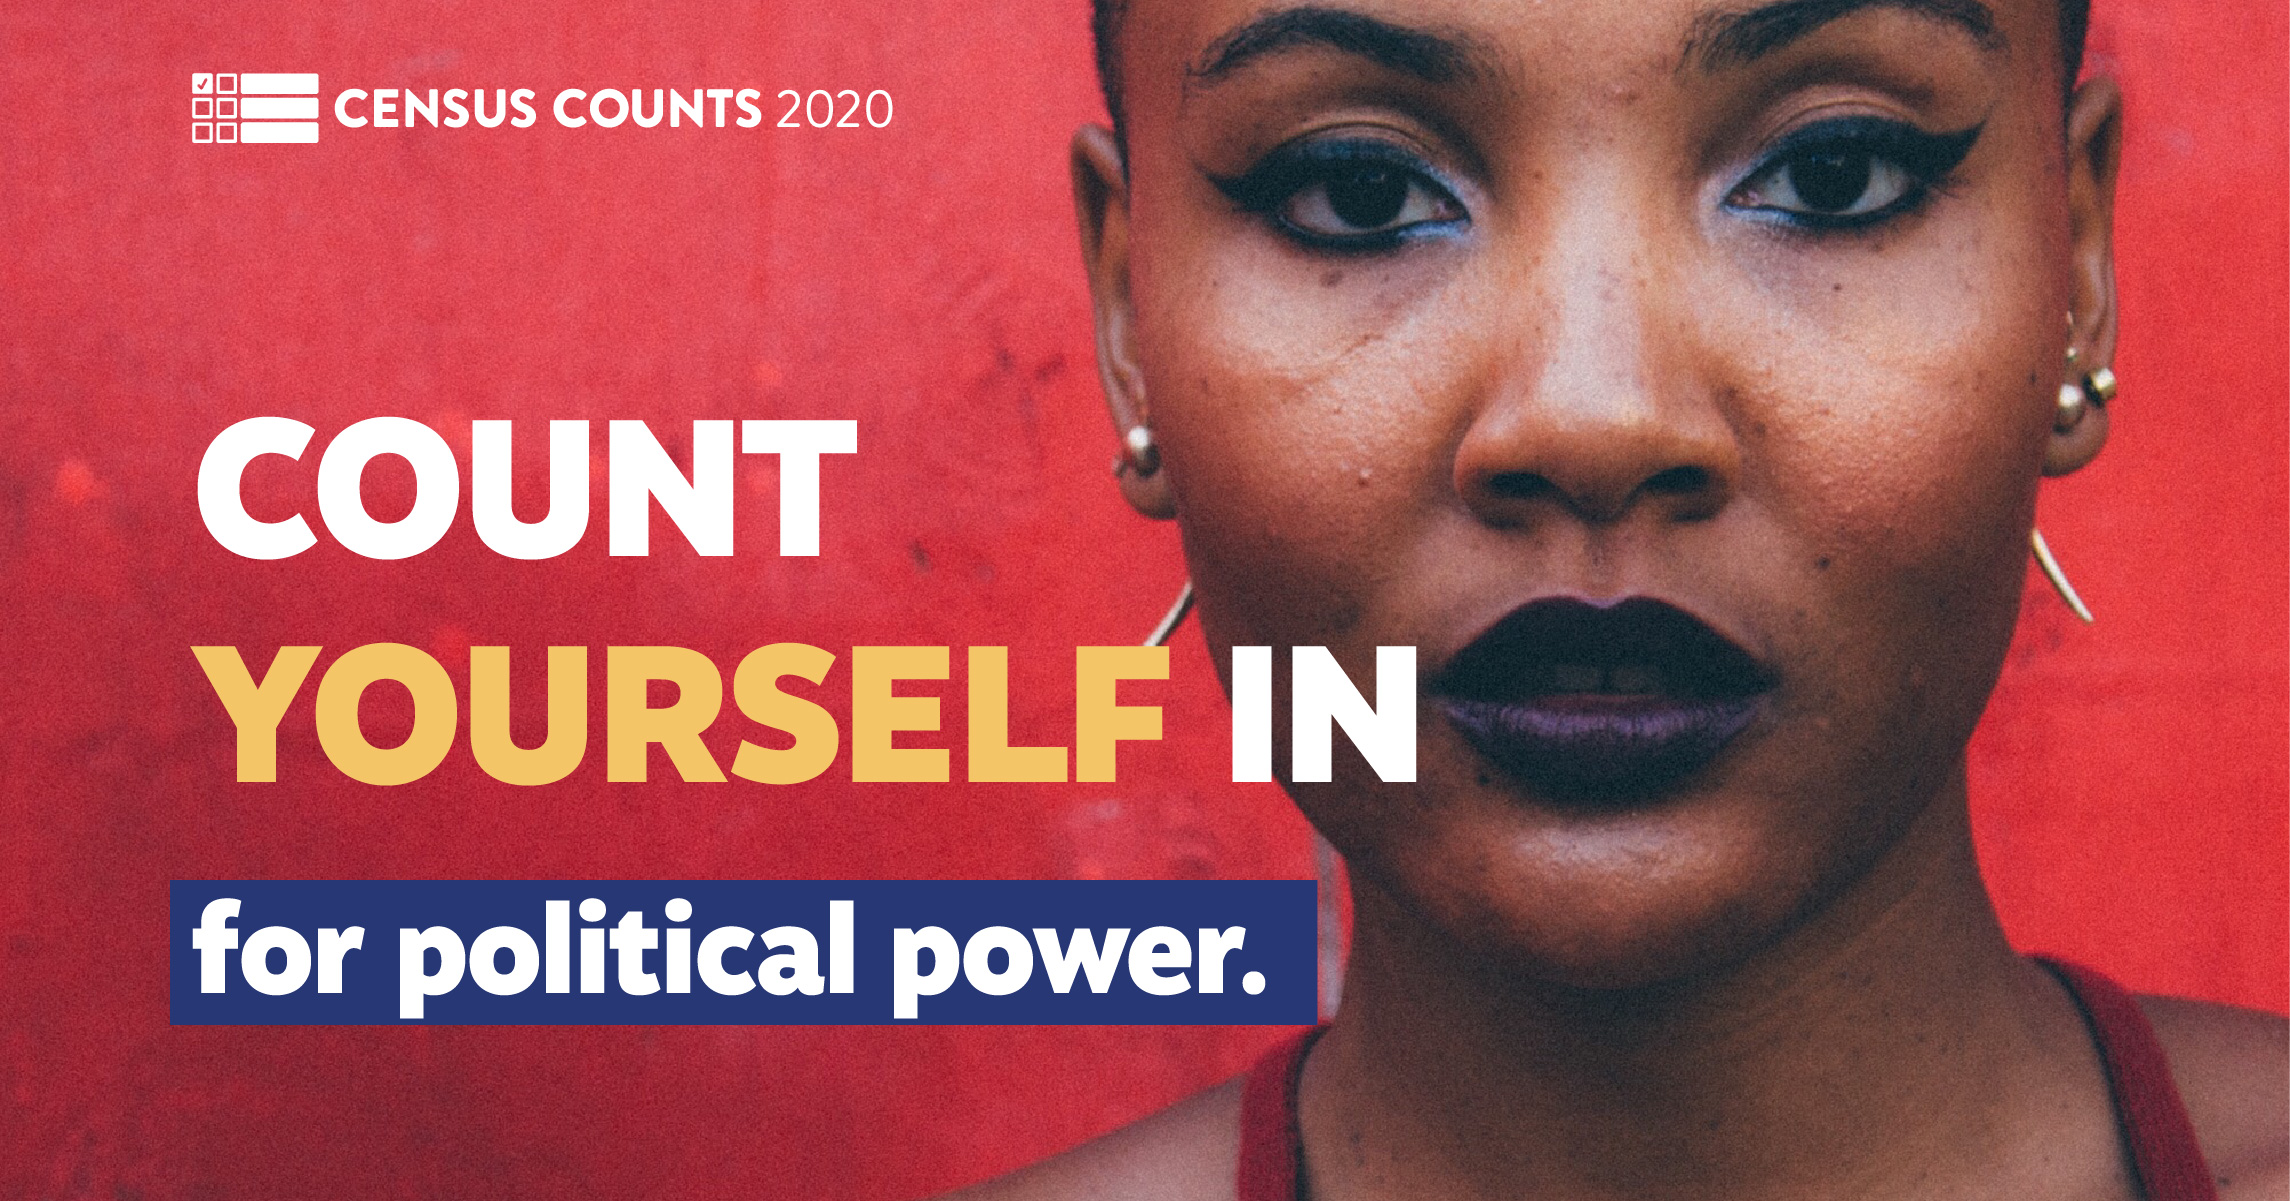 a photo with a red wall in the background, and an up-close photo of a Black person with winged eyeliner and dark lipstick. The text on the graphic says: 'COUNT YOURSELF IN for political power.' with the Census Counts 2020 logo on the top.